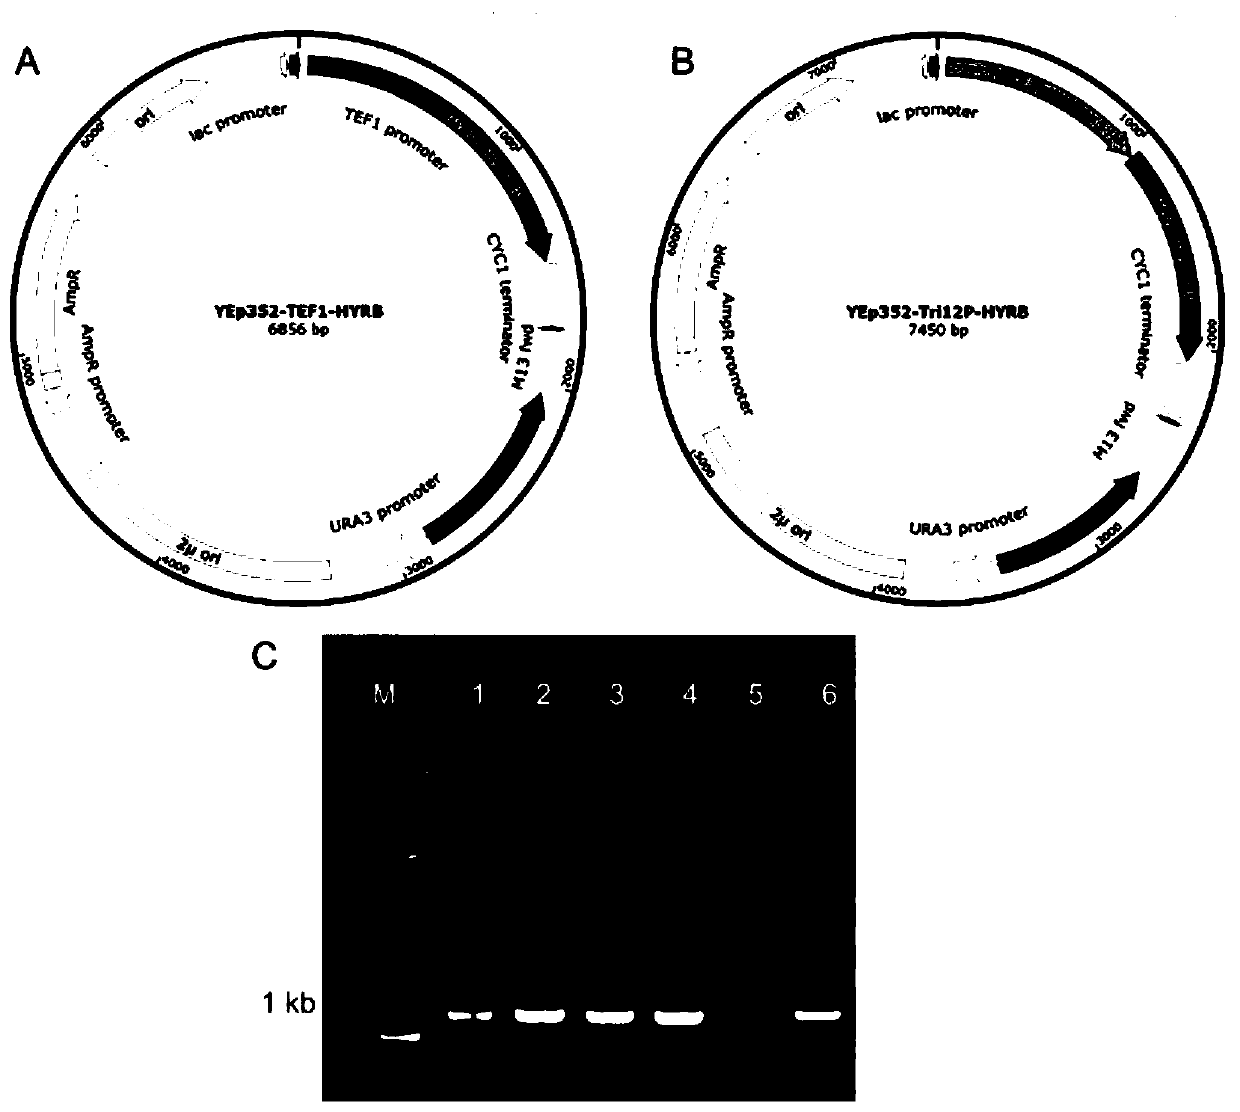 Promoter of trichothecene synthase gene Tri12 of Leucosphaeria dothidea A553 and application of promoter